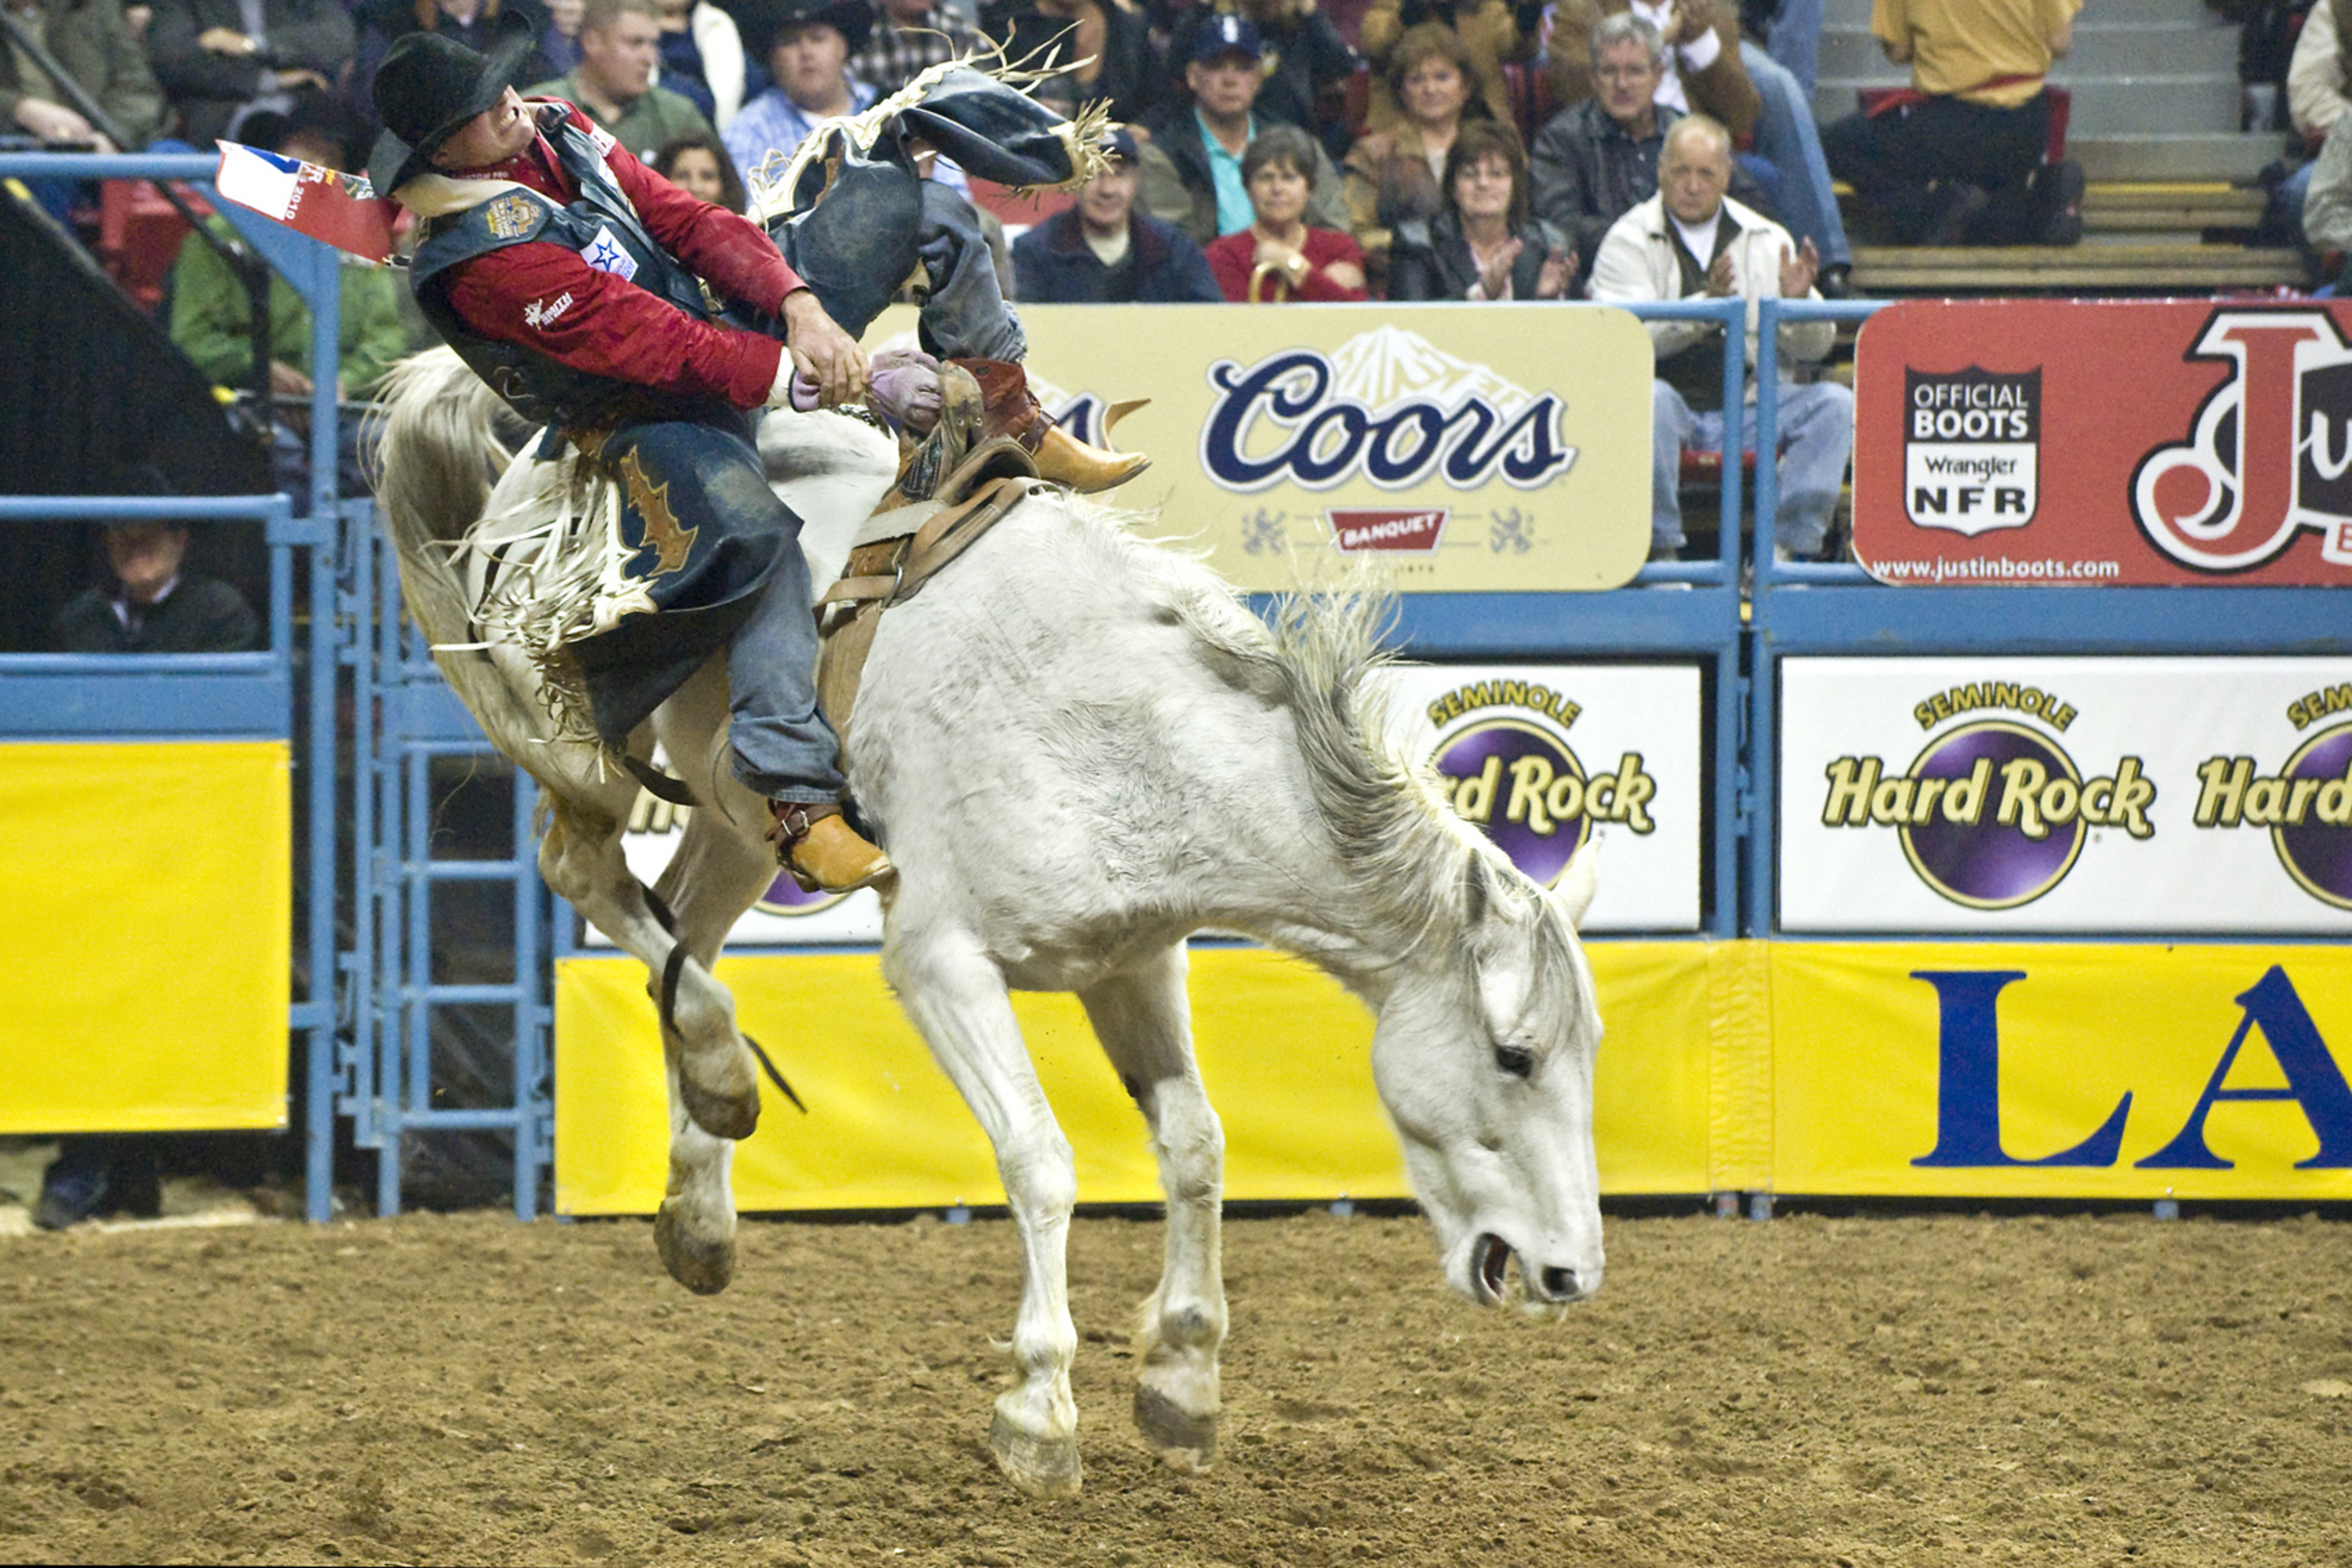 Everything You Need to Know About This Year's Wrangler National Finals Rodeo